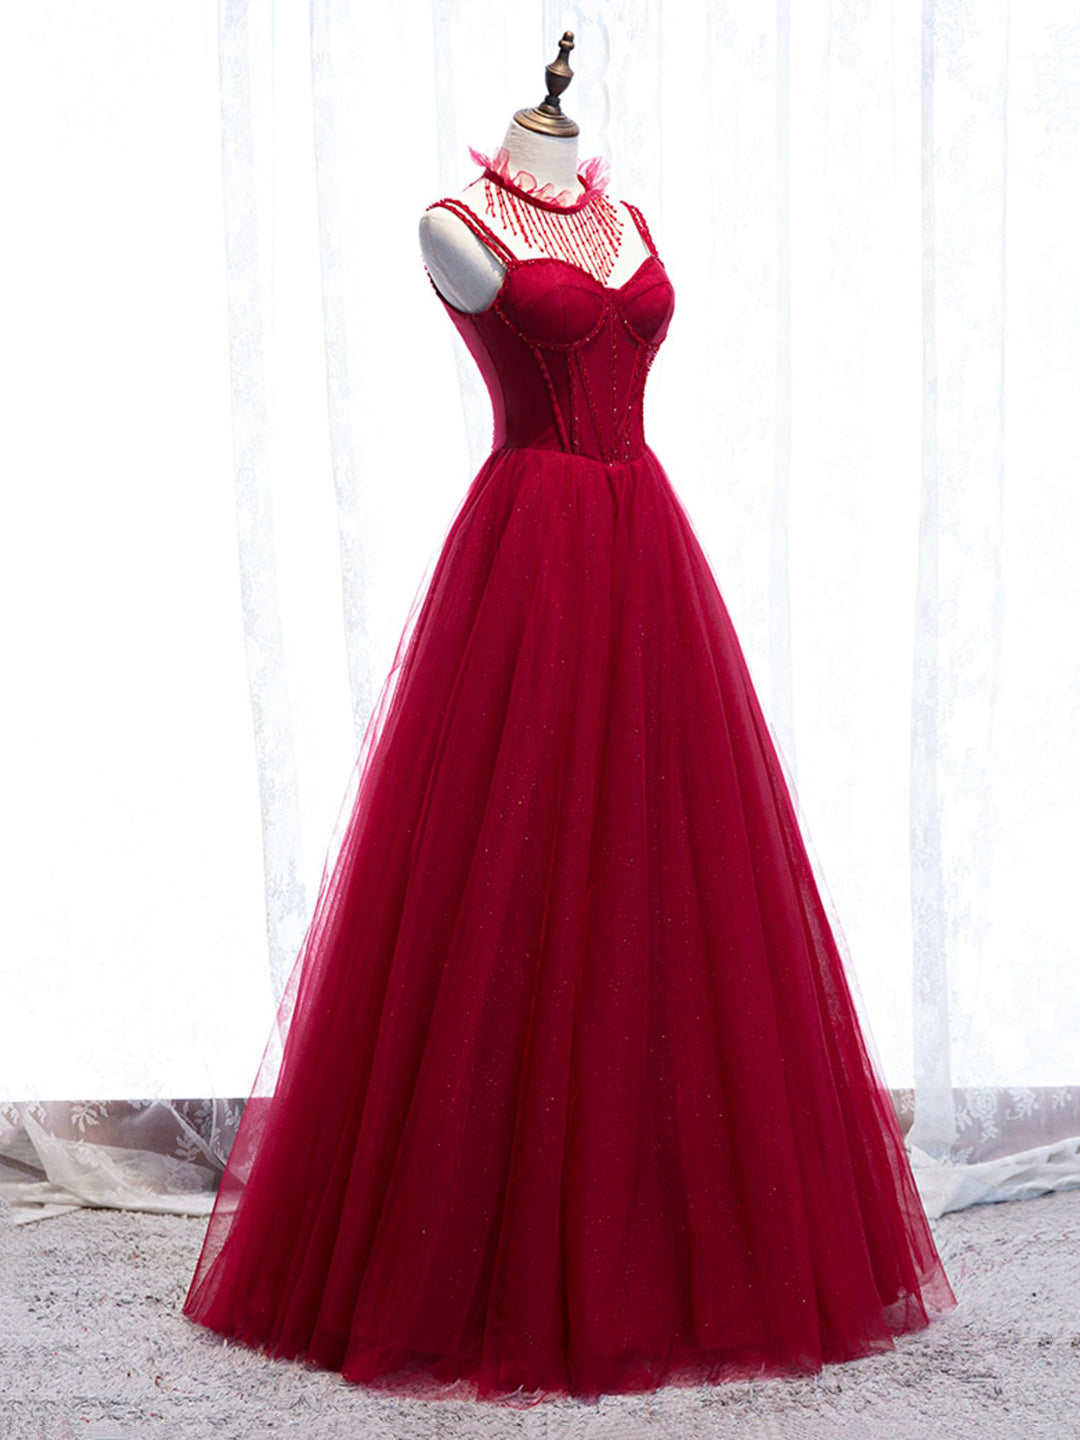 Evening Dresses For Weddings, Red Spaghetti Strap Tulle Party Dress, Red Floor Length Prom Dress